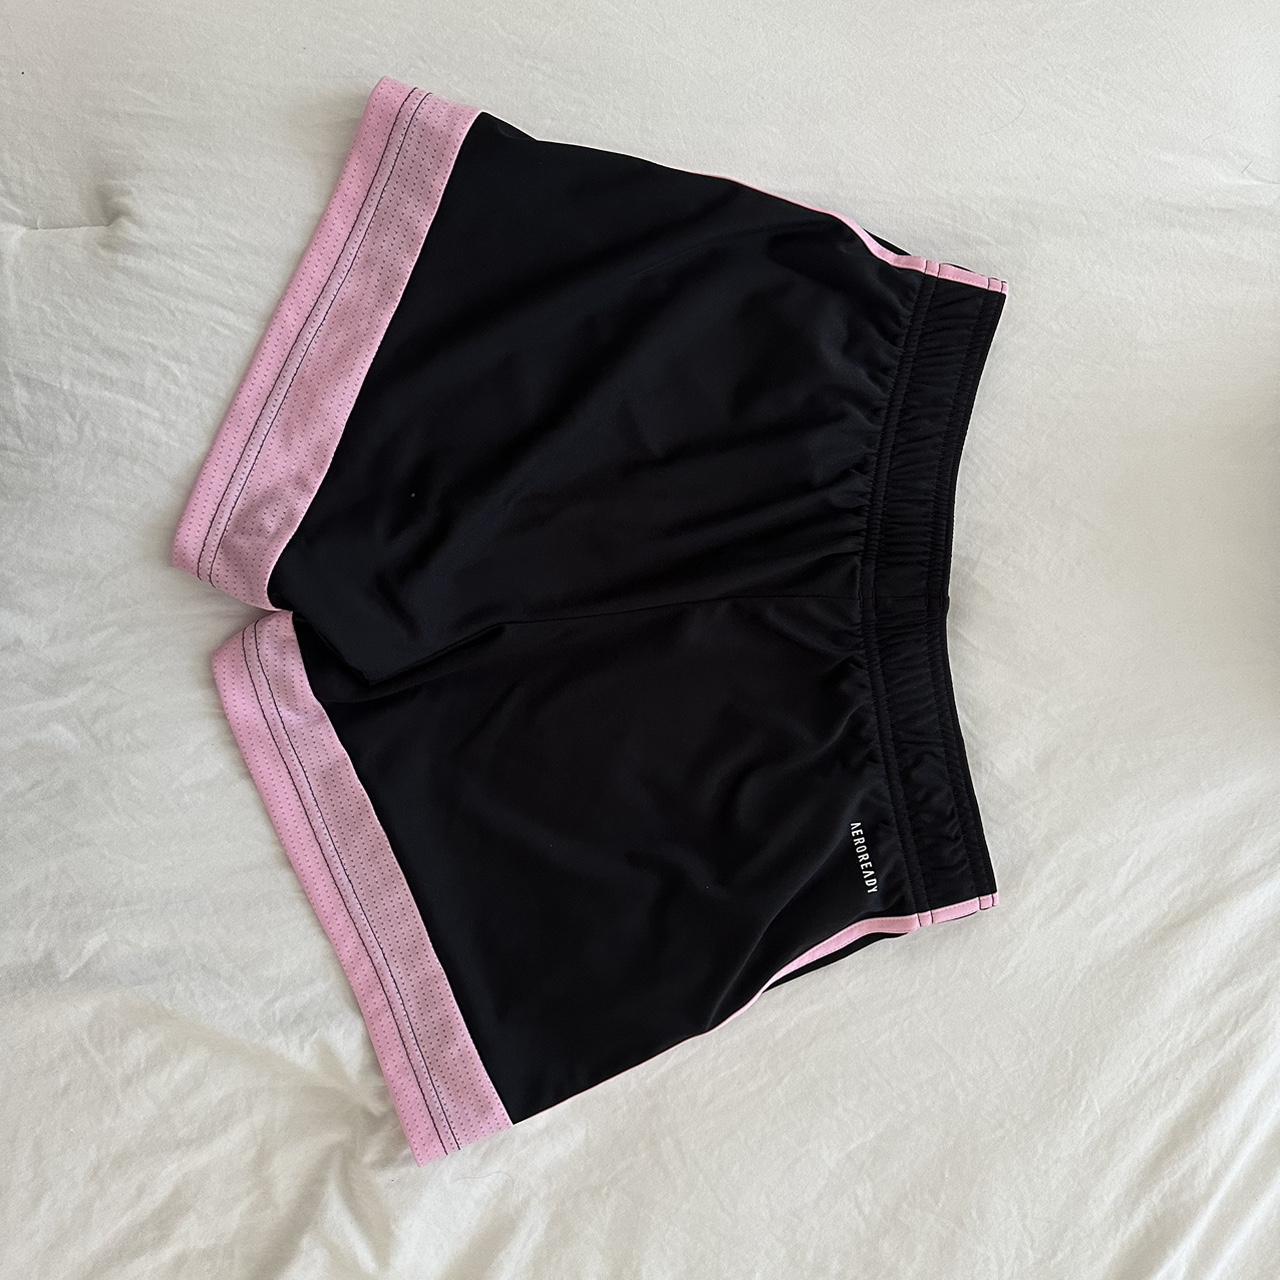 Adidas Women's Pink and Black Shorts (2)